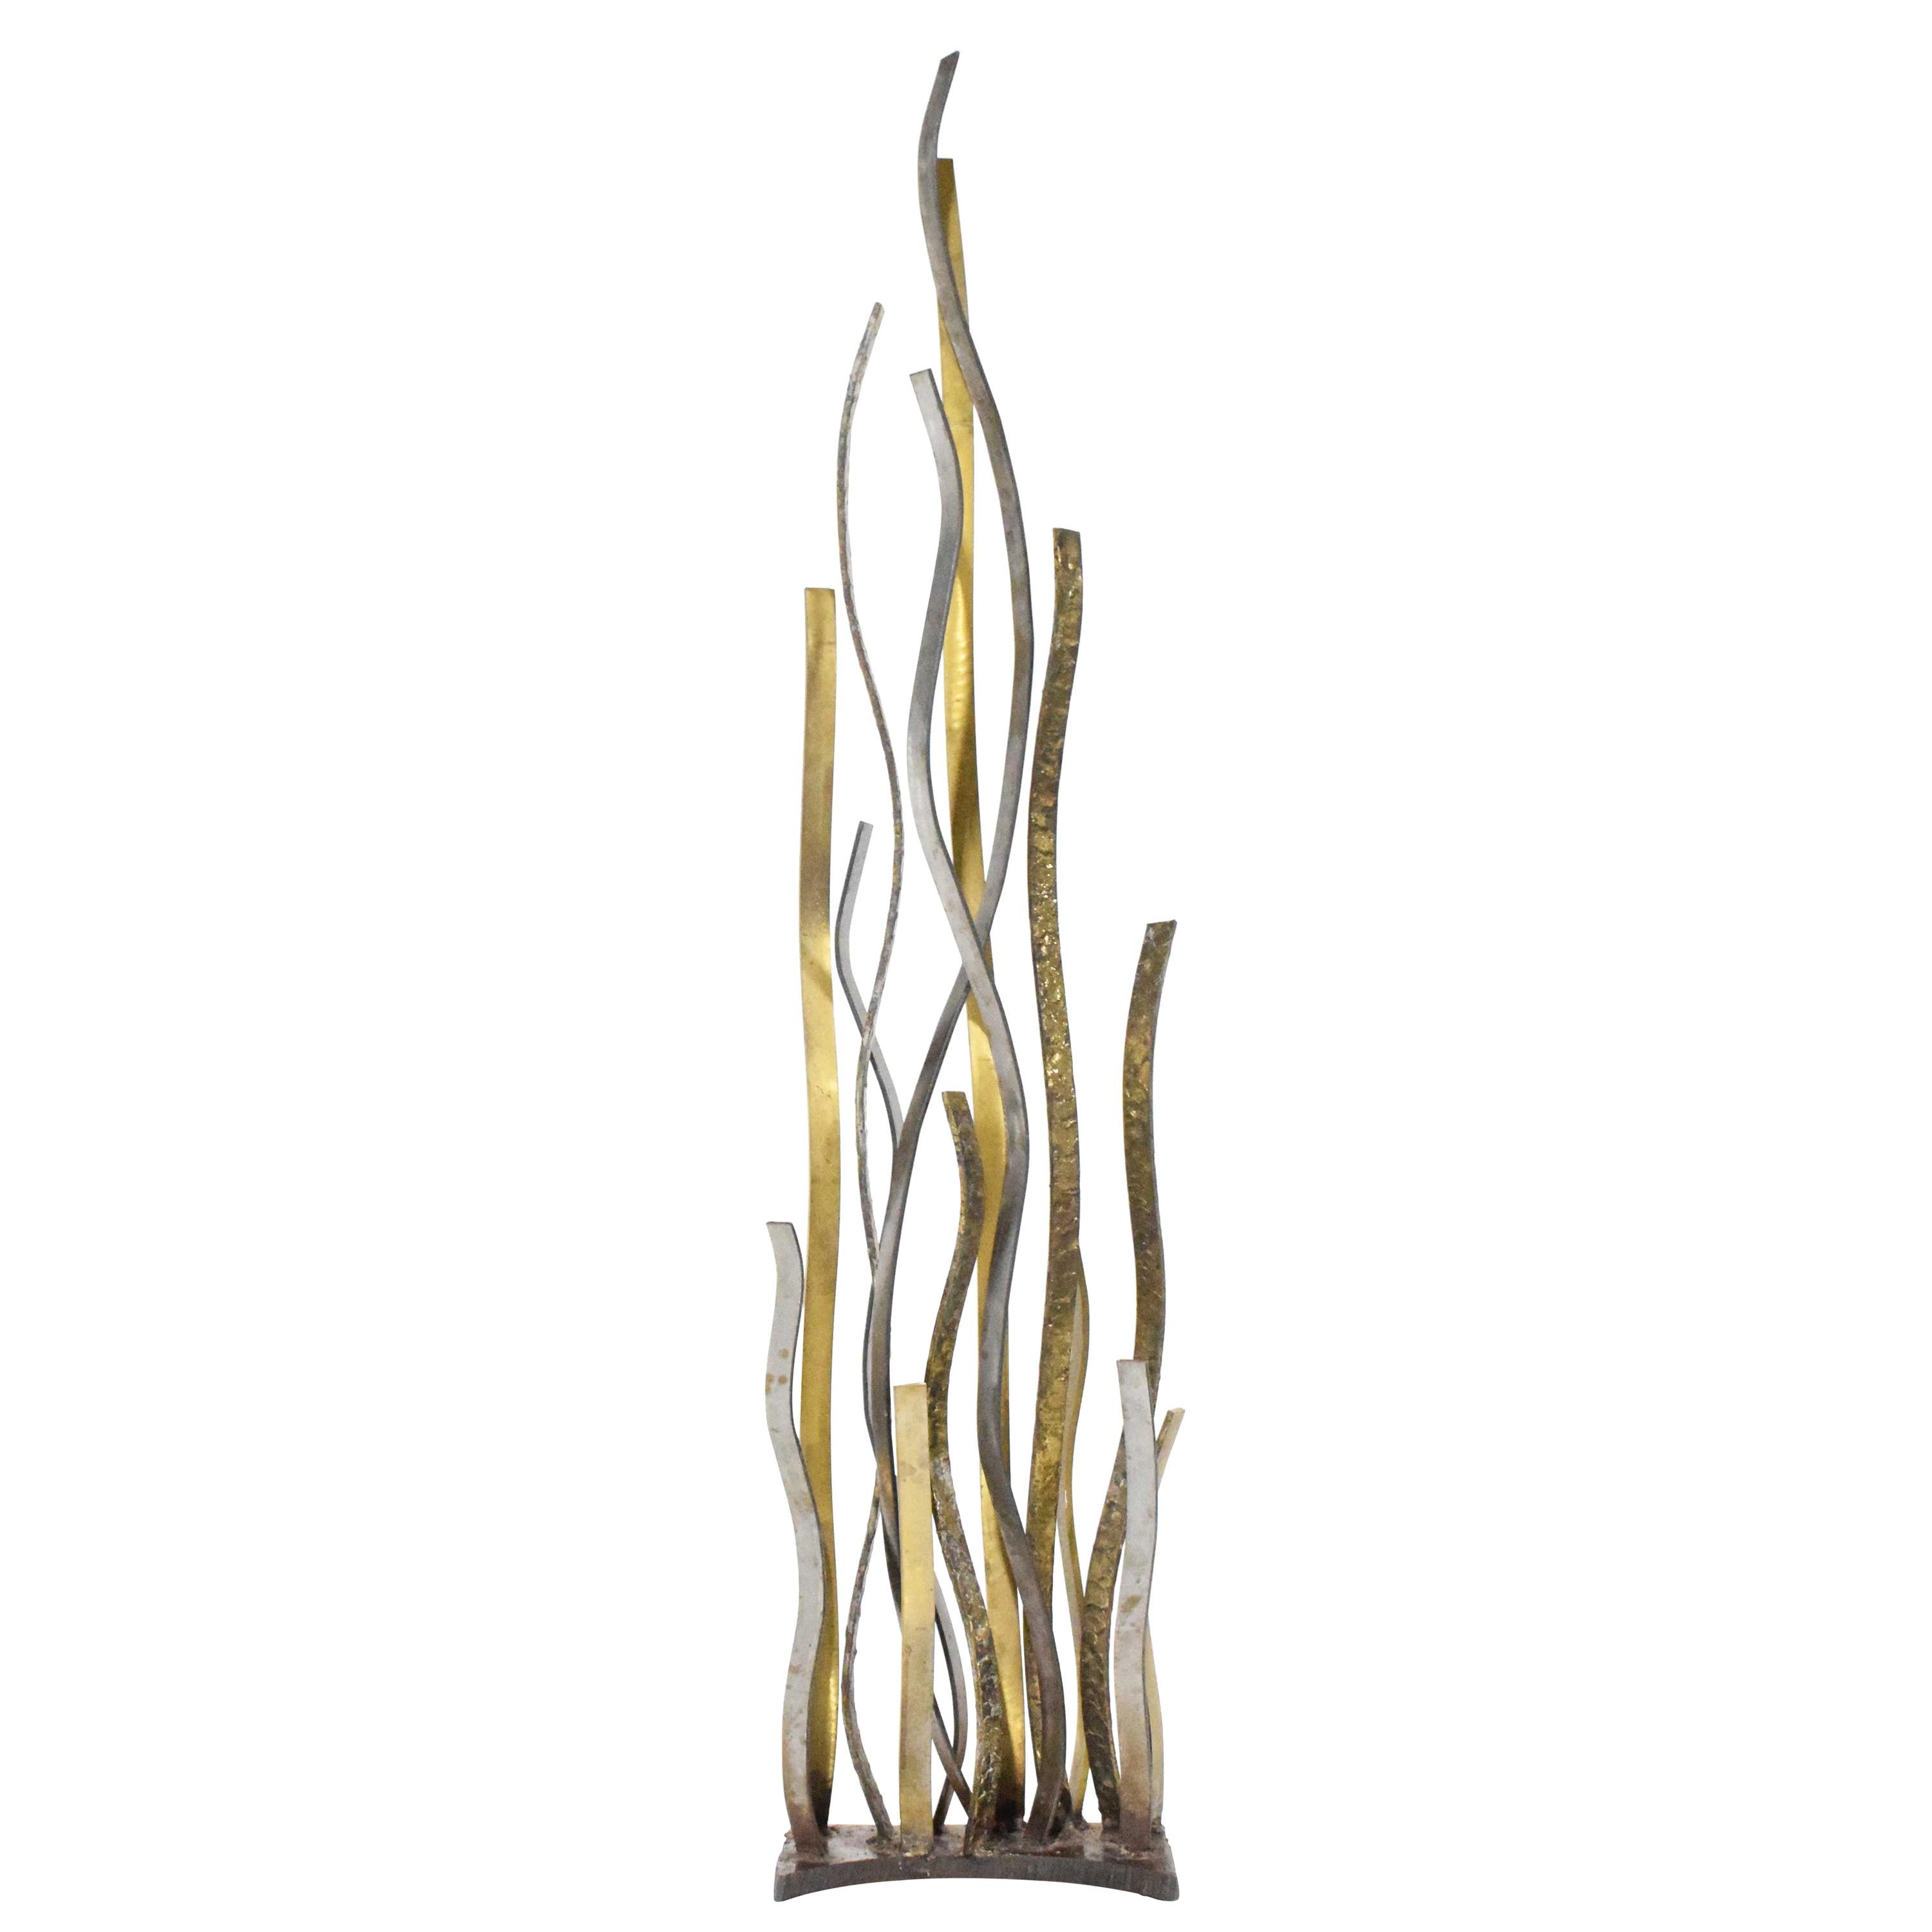 Very tall Silas Seandel mixed metal sculpture. In brass, bronze and steel. Abstract design that mimics tall grass or flames with a wavy effect. Incised to base 